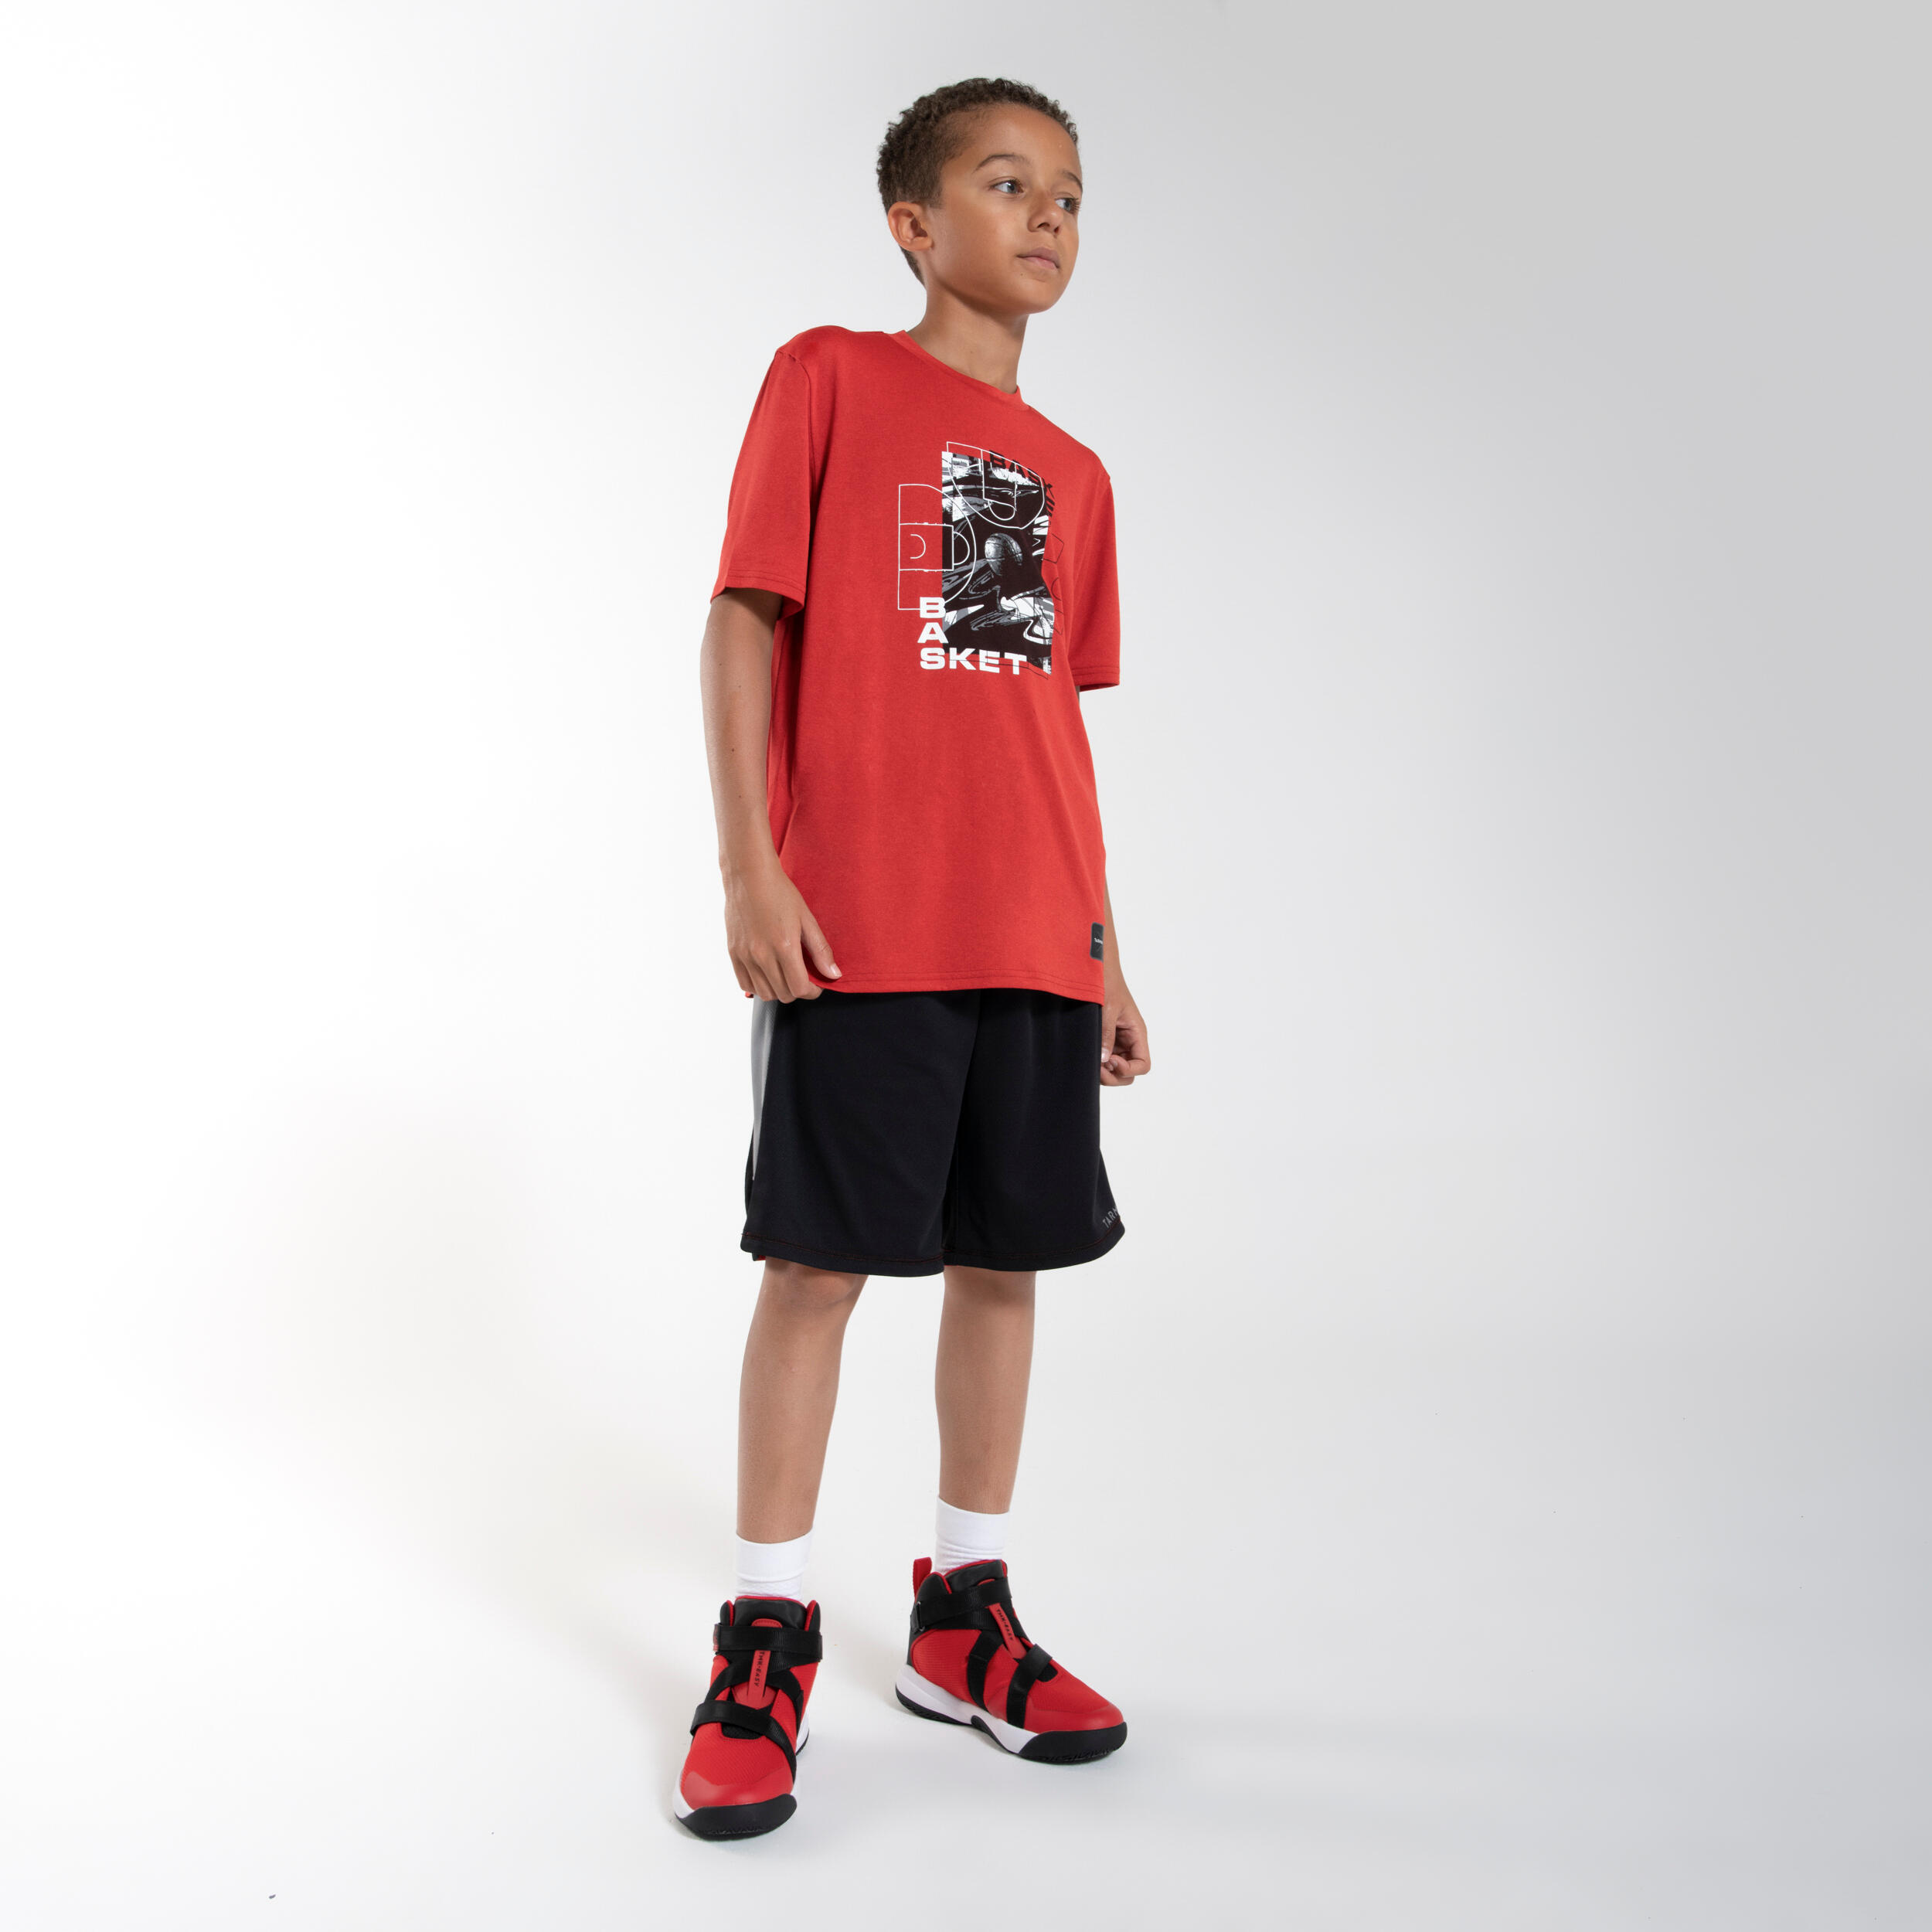 Kids' Basketball Shoes Easy X - Red 9/9